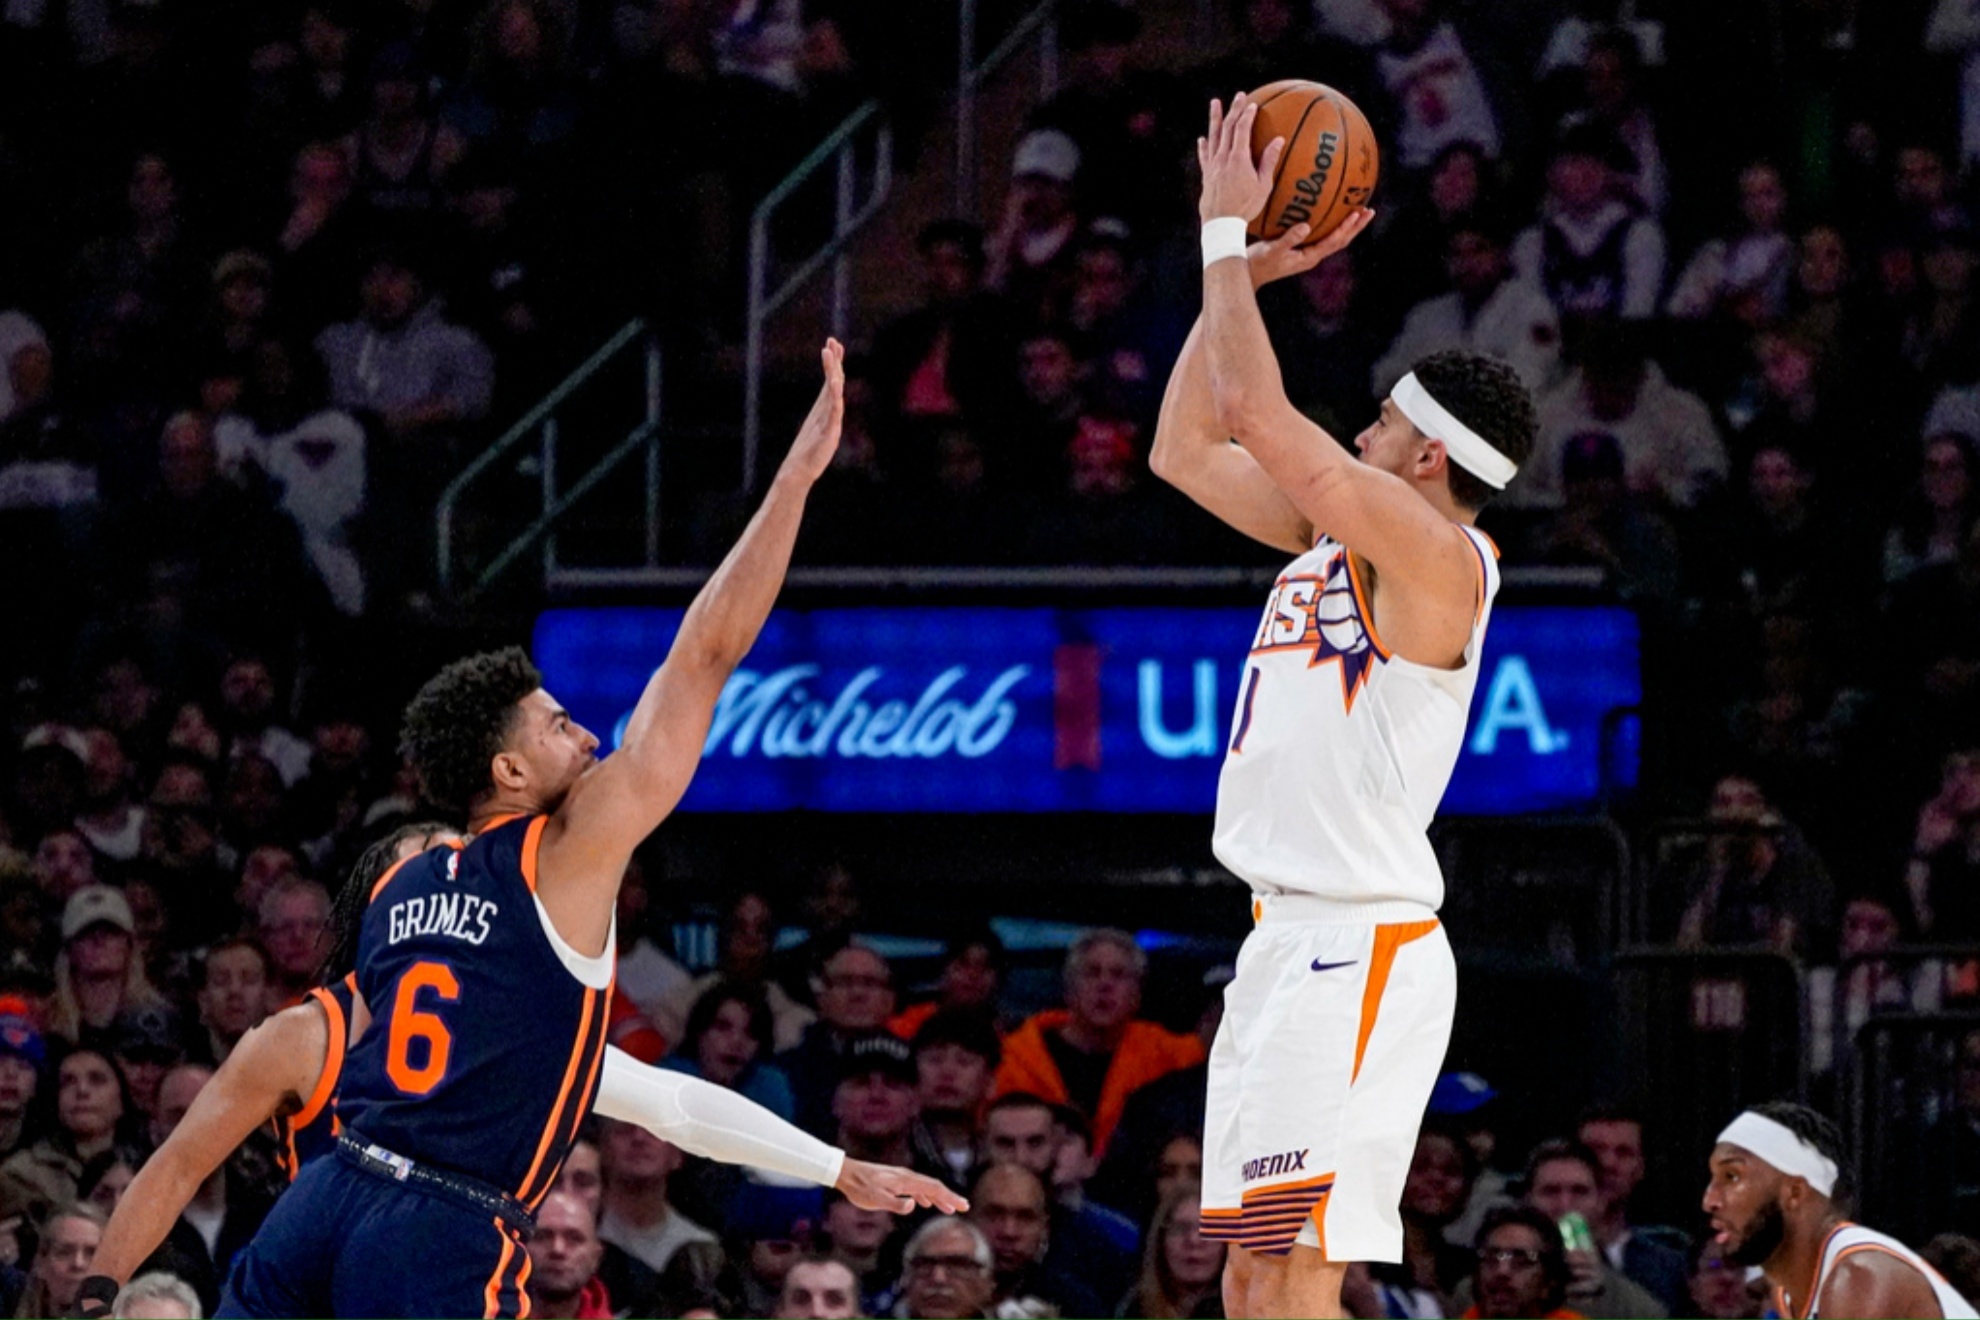 Devin Booker shooting over Knicks' Quentin Grimes.